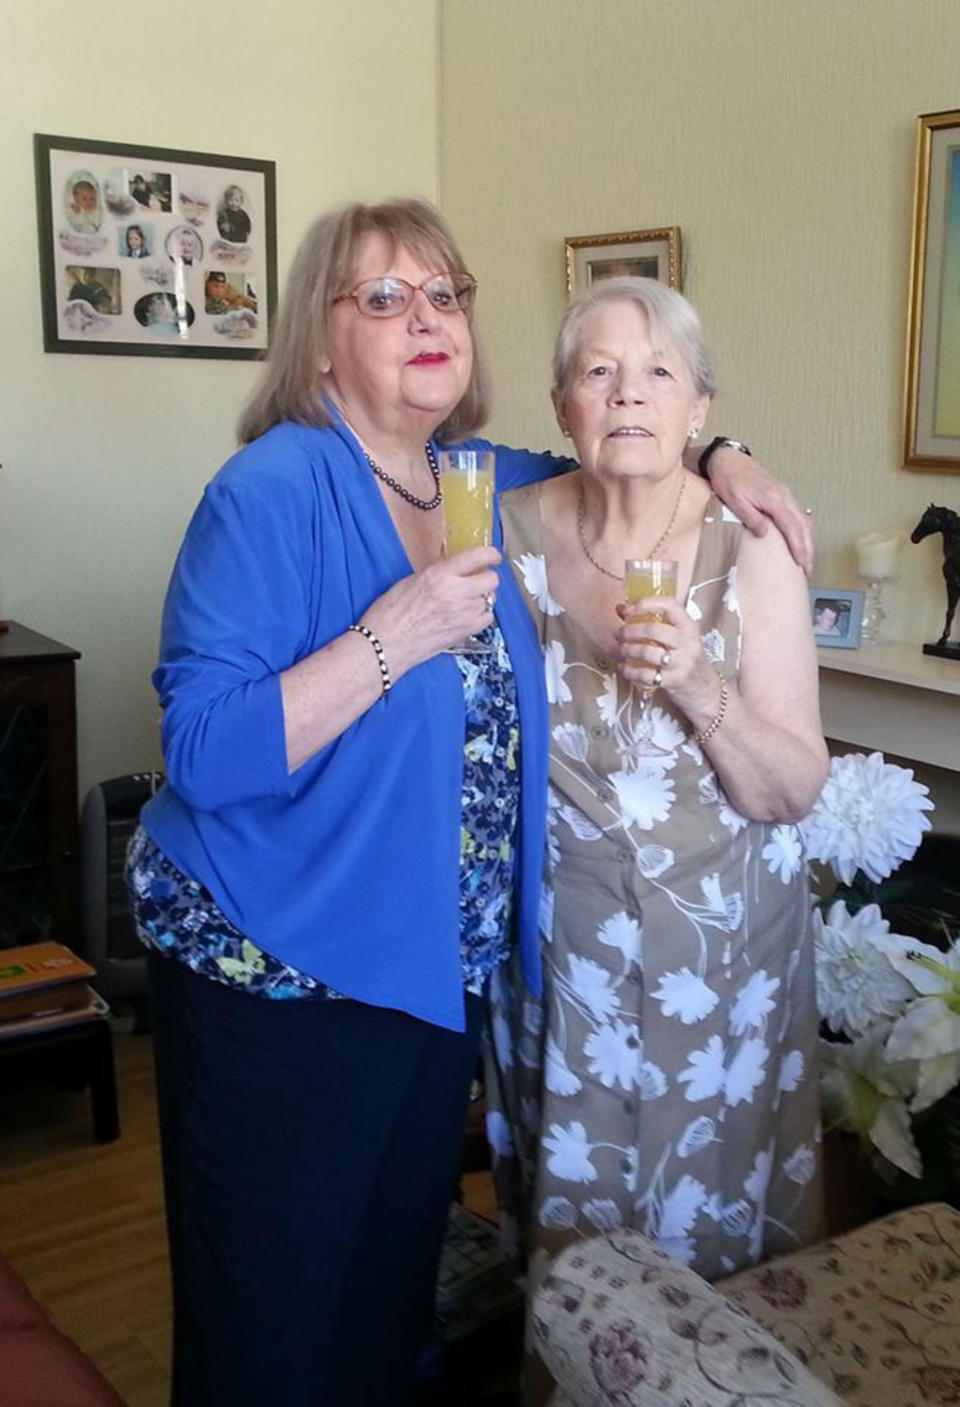 Eileen Triffitt (left) and Mavis Macleod (right) have been reunited after 50 years apart. (Caters)